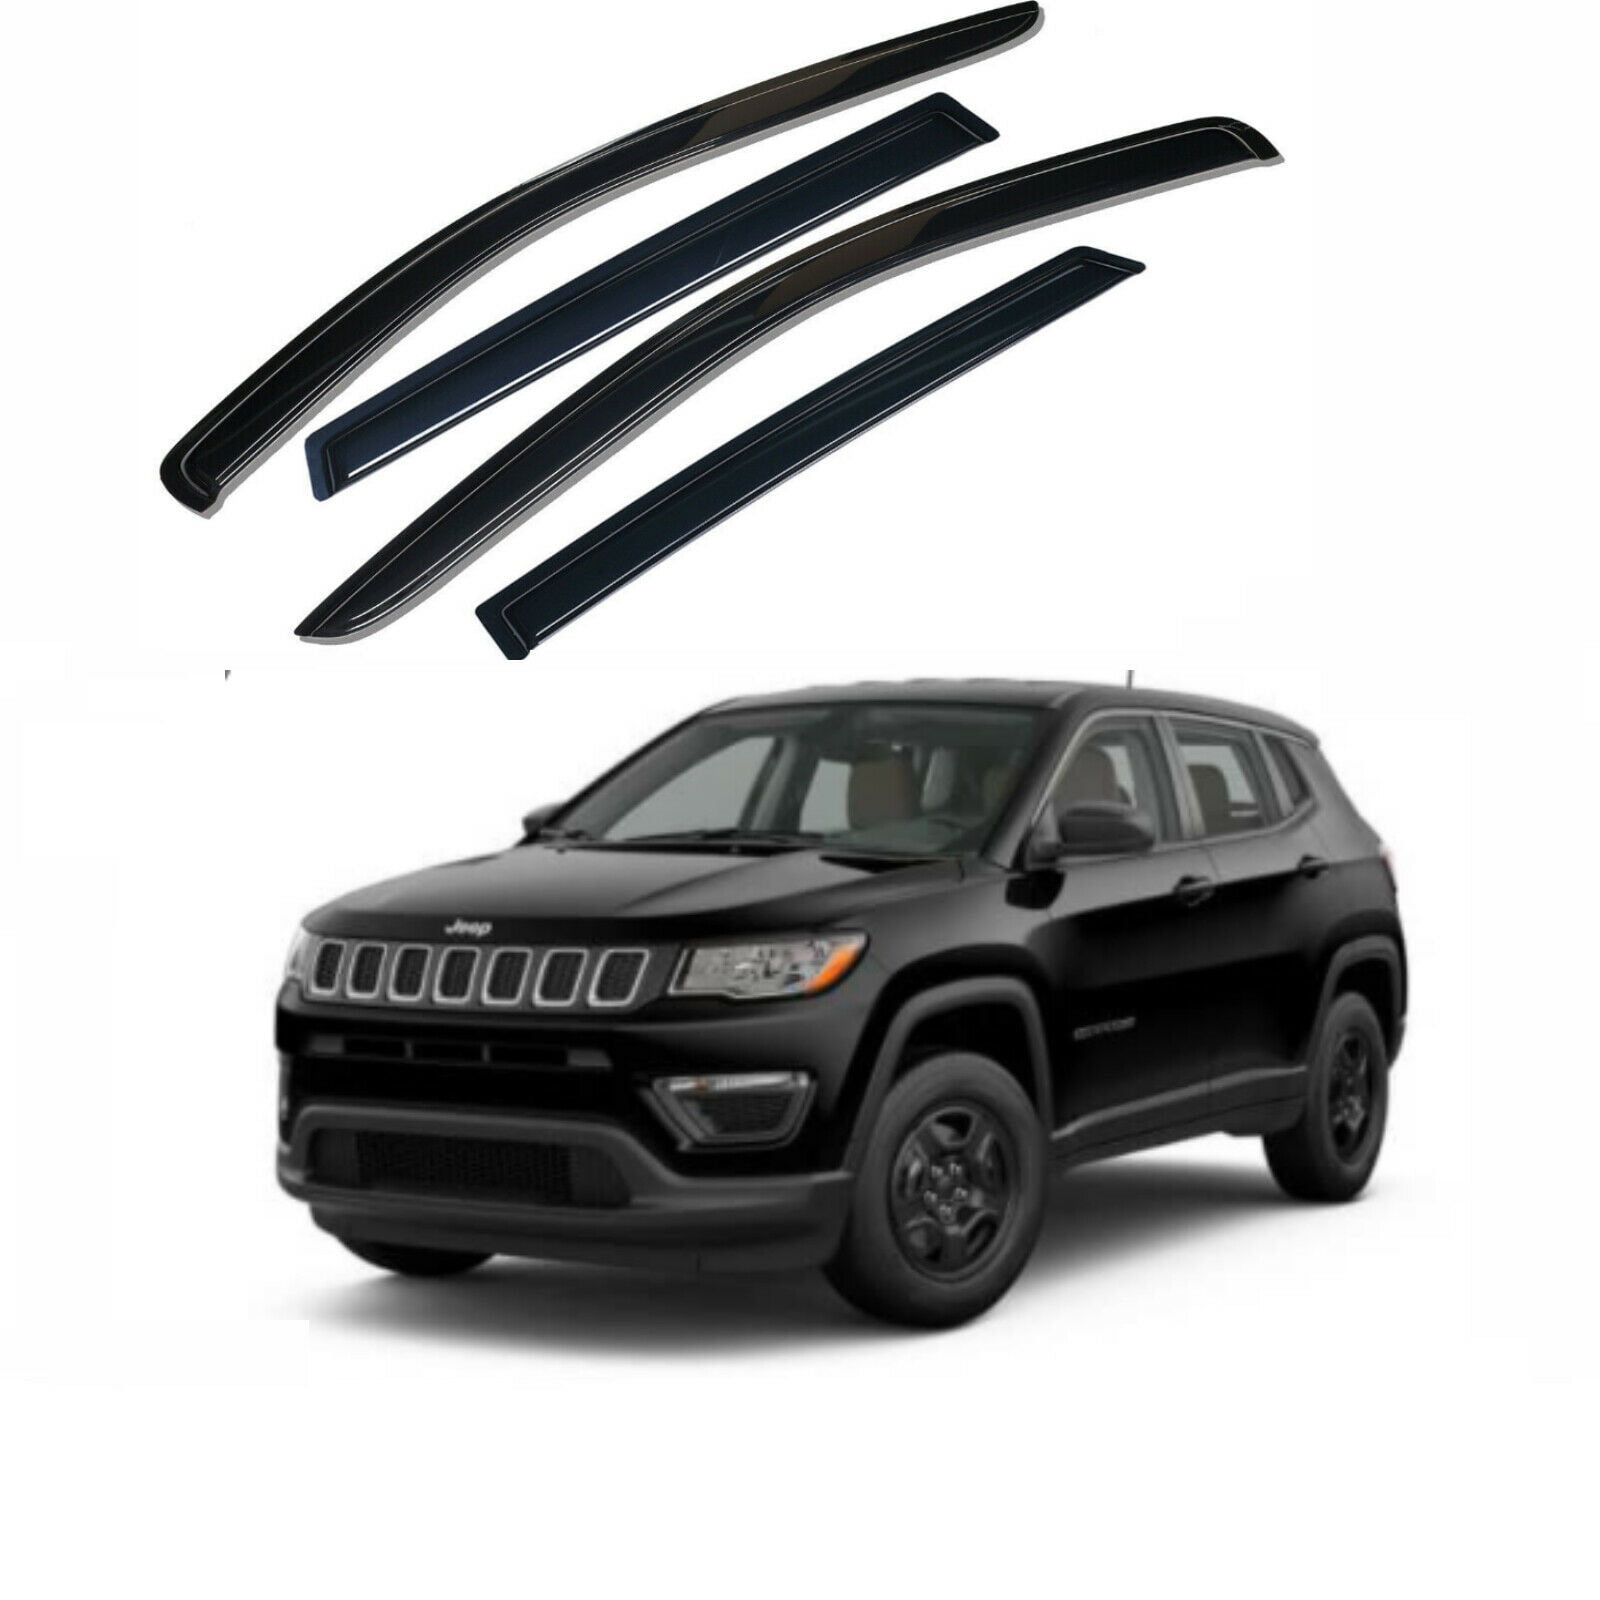 Window Visors GY003149 4 Pieces Goodyear Side Window Deflectors for Jeep Compass 2011-2017 Tape-on Rain Guards 